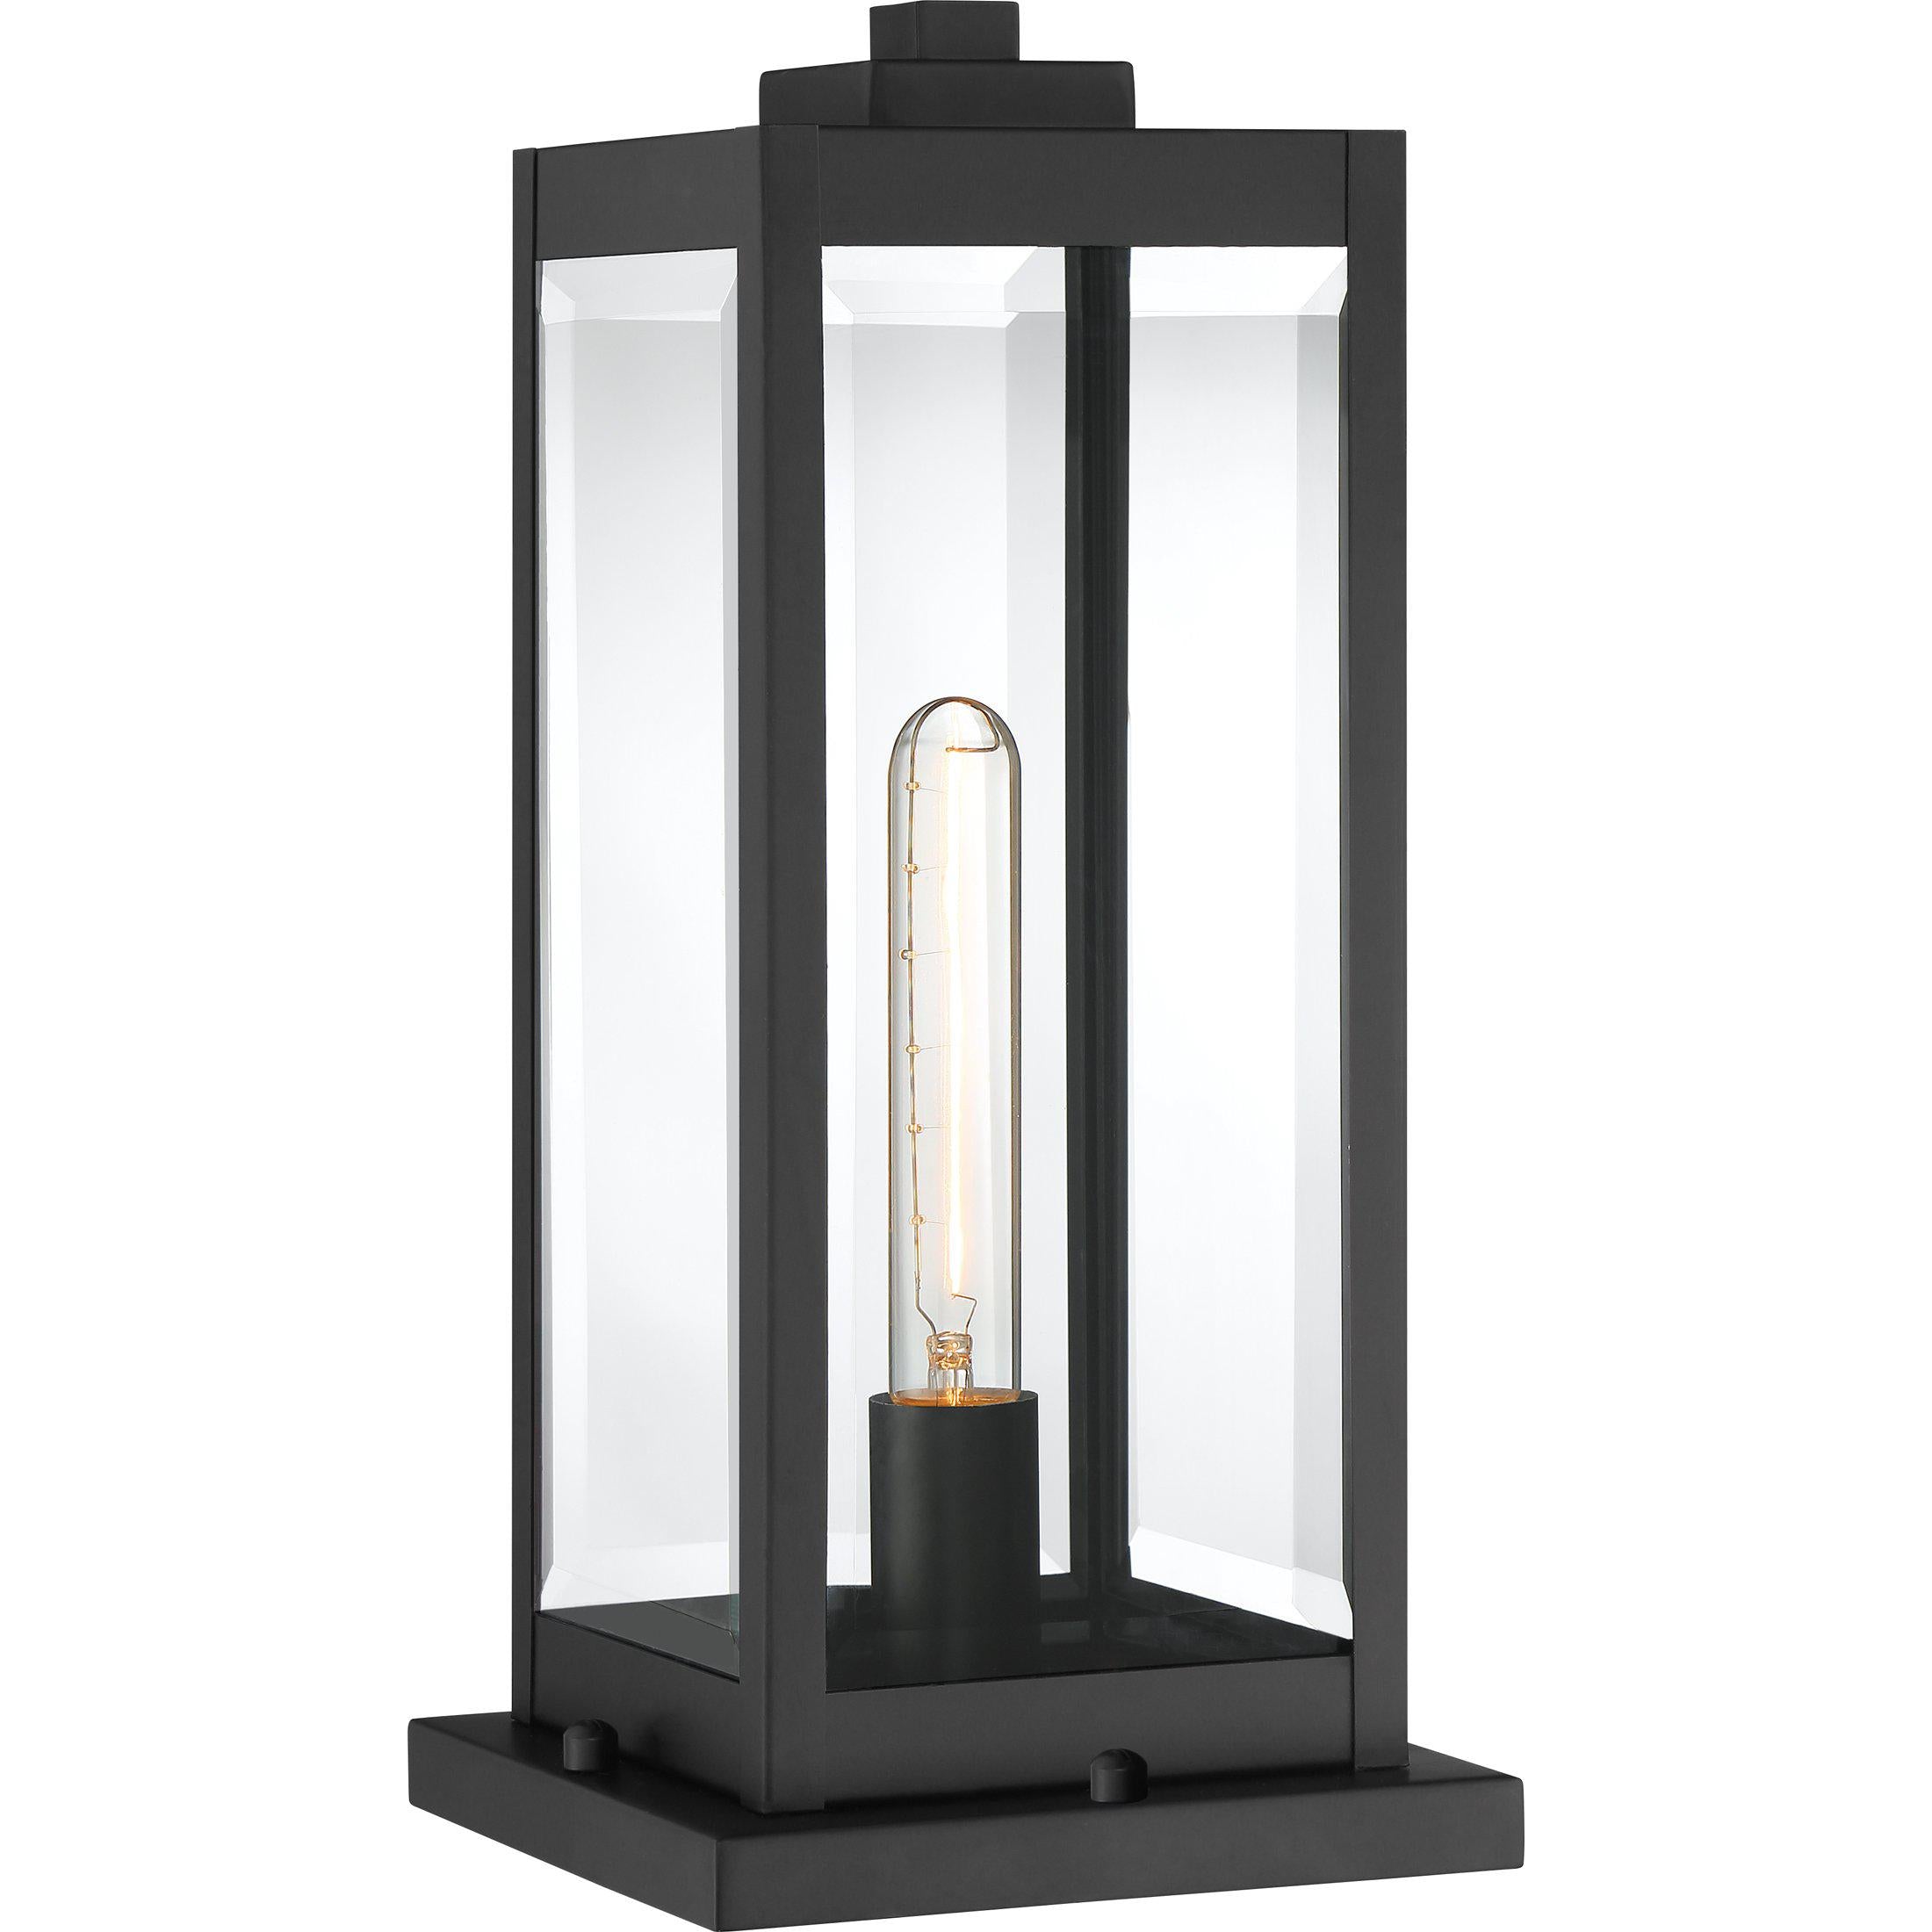 Quoizel  Westover Outdoor Lantern, Pier Outdoor l Wall Quoizel Earth Black  